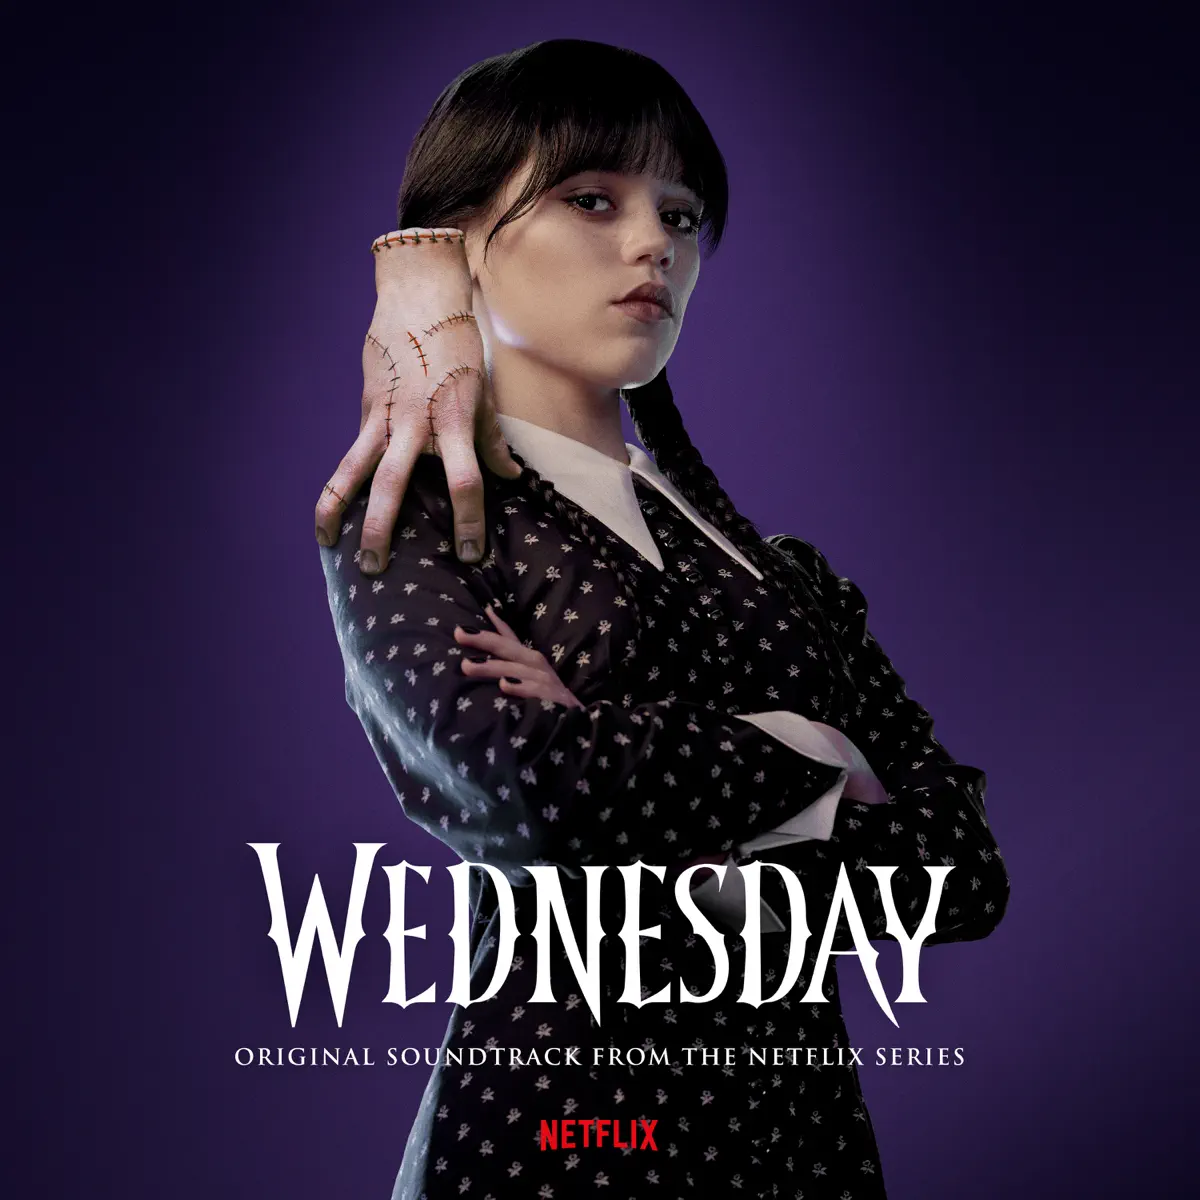 Wednesday Addams, Nevermore Academy Orchestra & Danny Elfman - Wednesday (Original Soundtrack From the Netflix Series) (2023) [iTunes Plus AAC M4A]-新房子